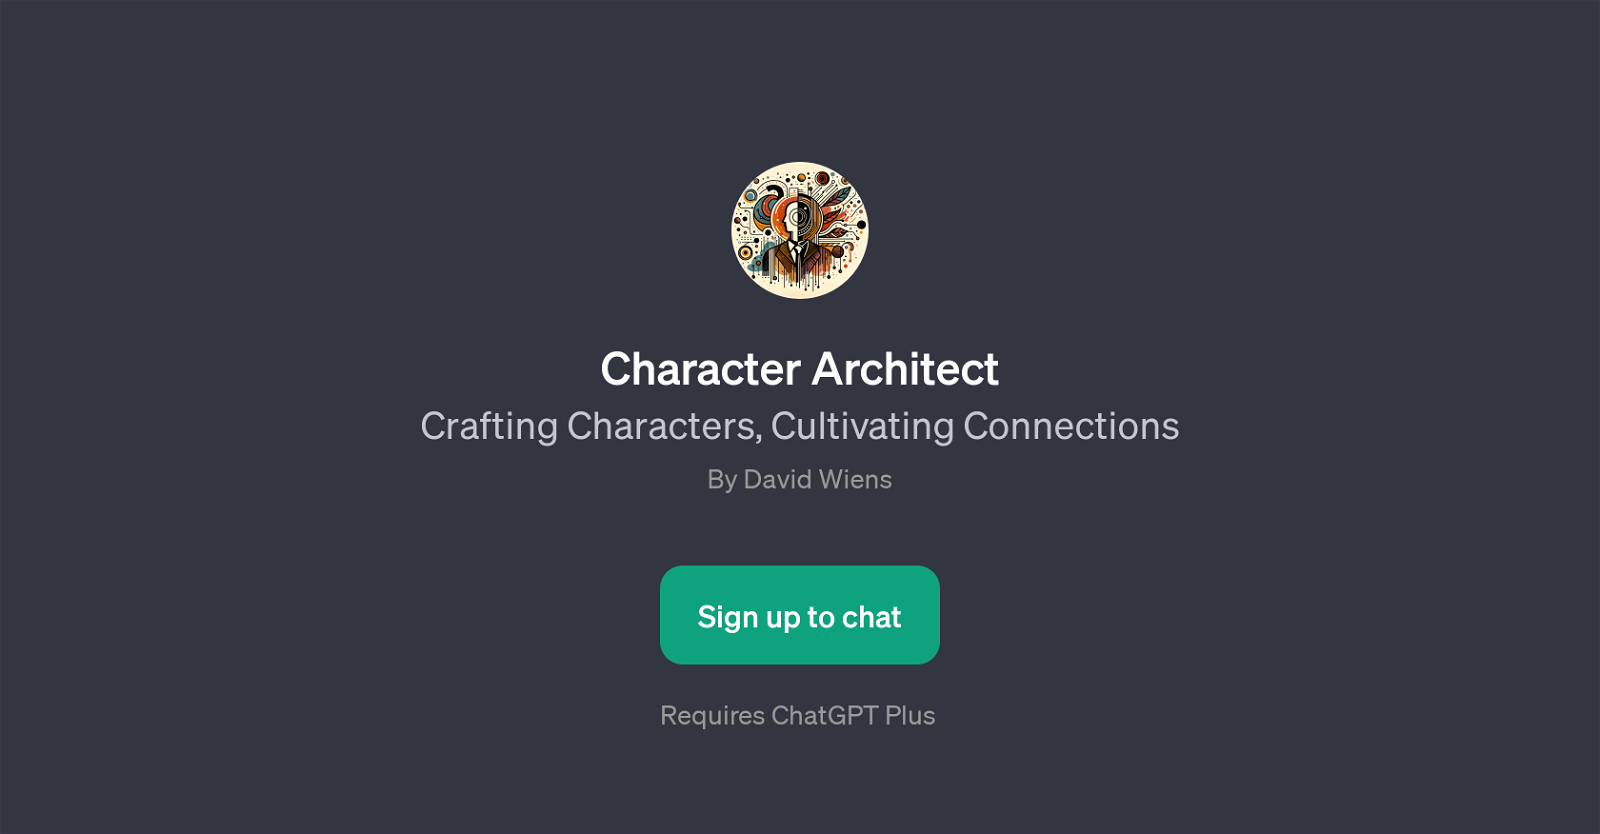 Character Architect website